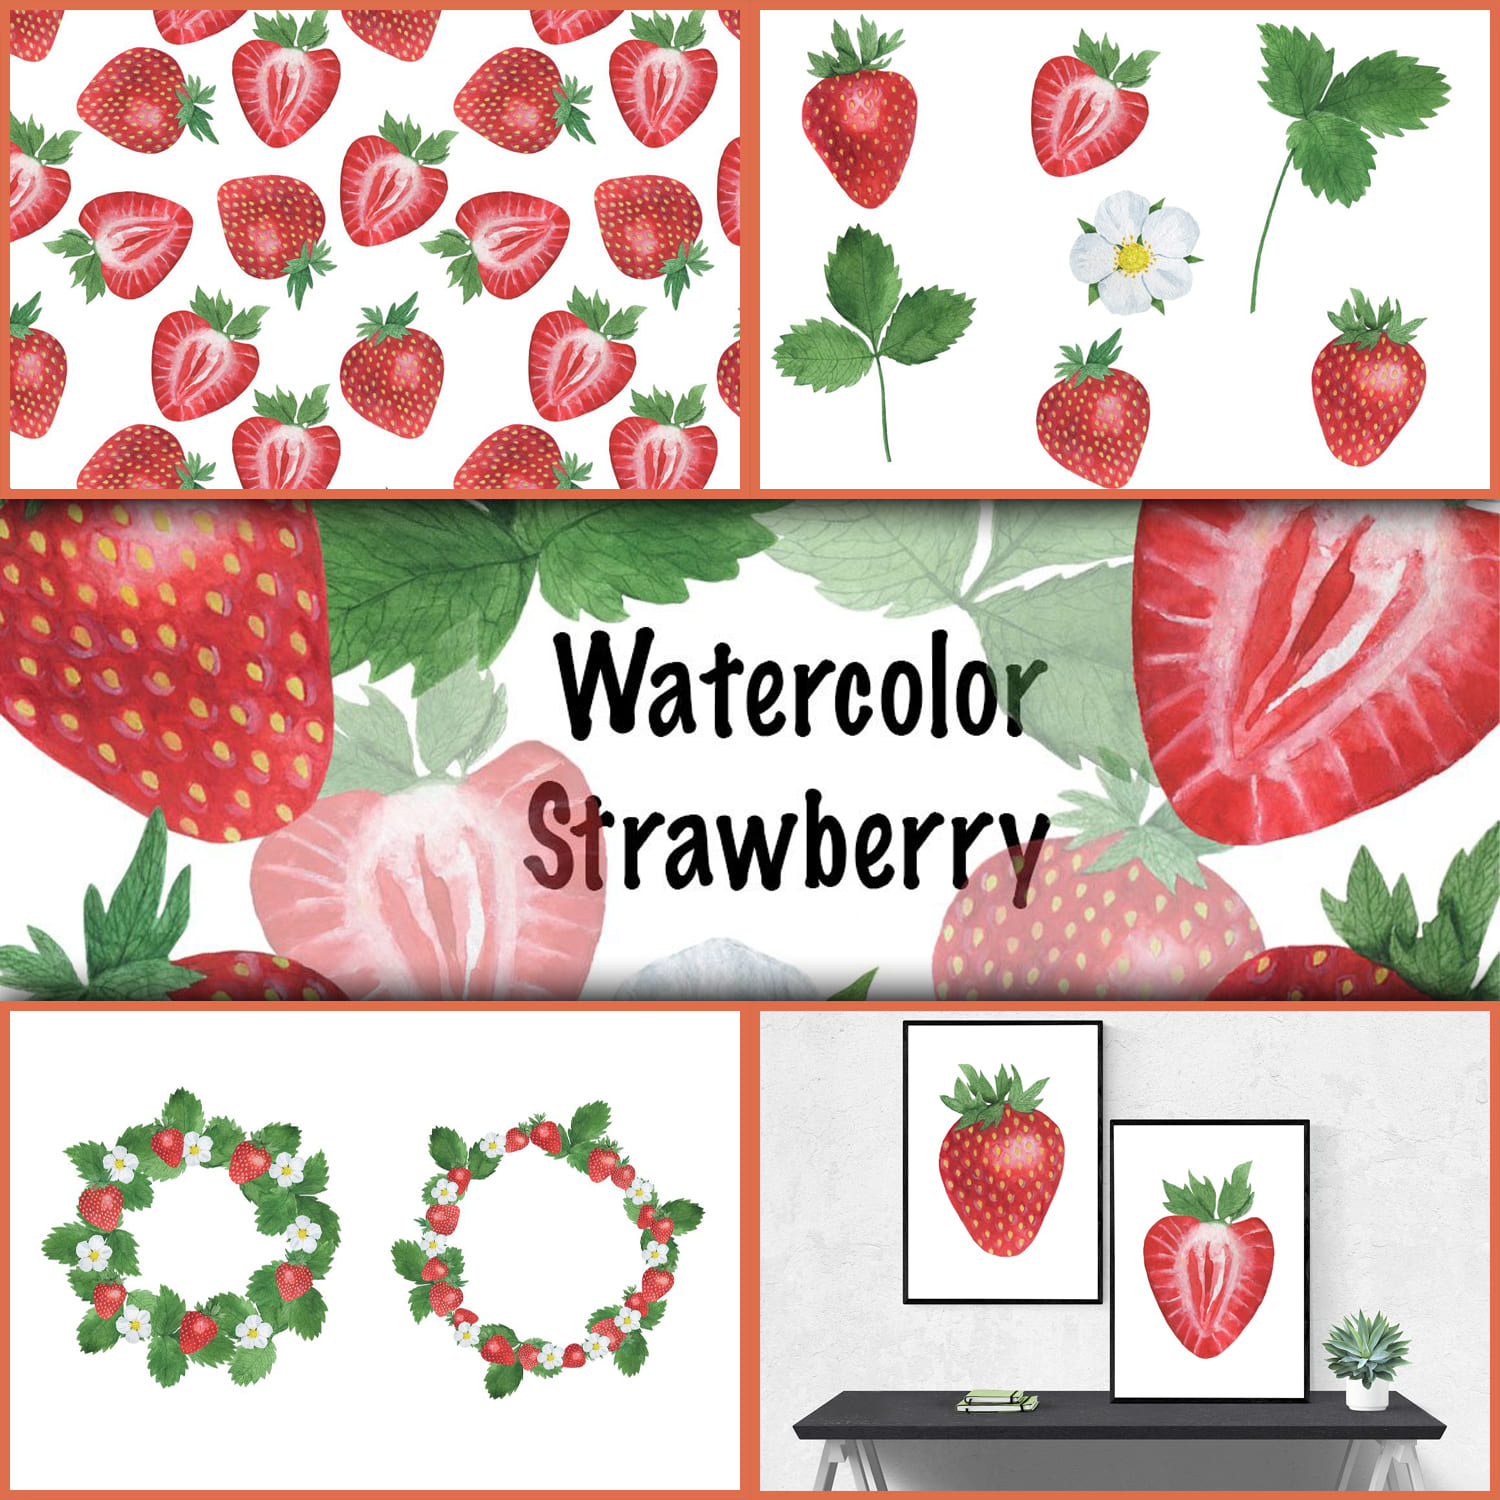 Strawberry watercolor.Strawberry pattern. Strawberry frame cover.